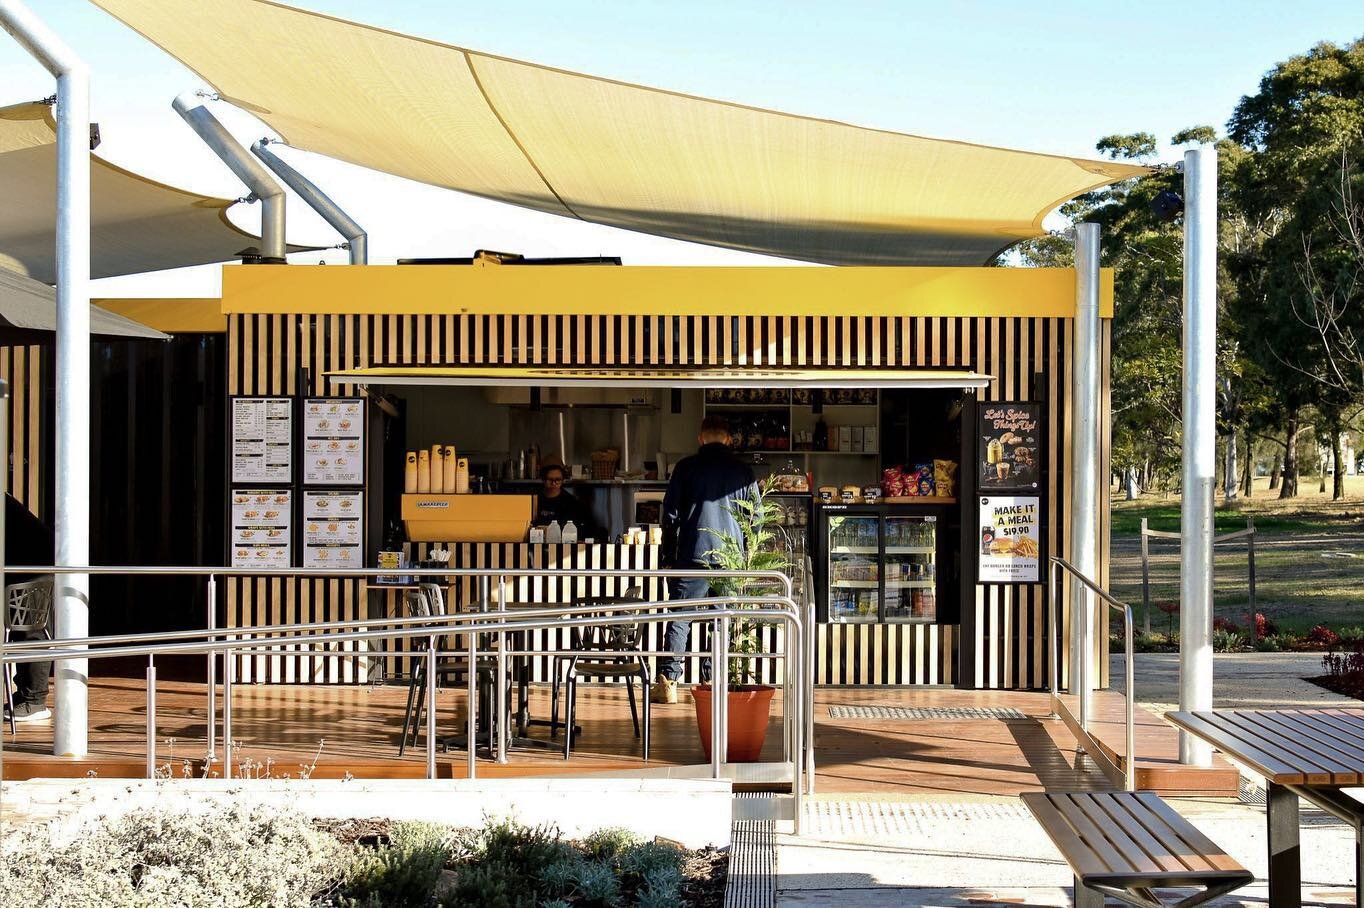 We're thrilled to share the journey of our project completed earlier this year at Bankstown Airport for @piccolome !

The result: a chic outdoor cafe space featuring a deck, canopy and stunning wood-clad detailing ☕

A huge thank you to our team for 